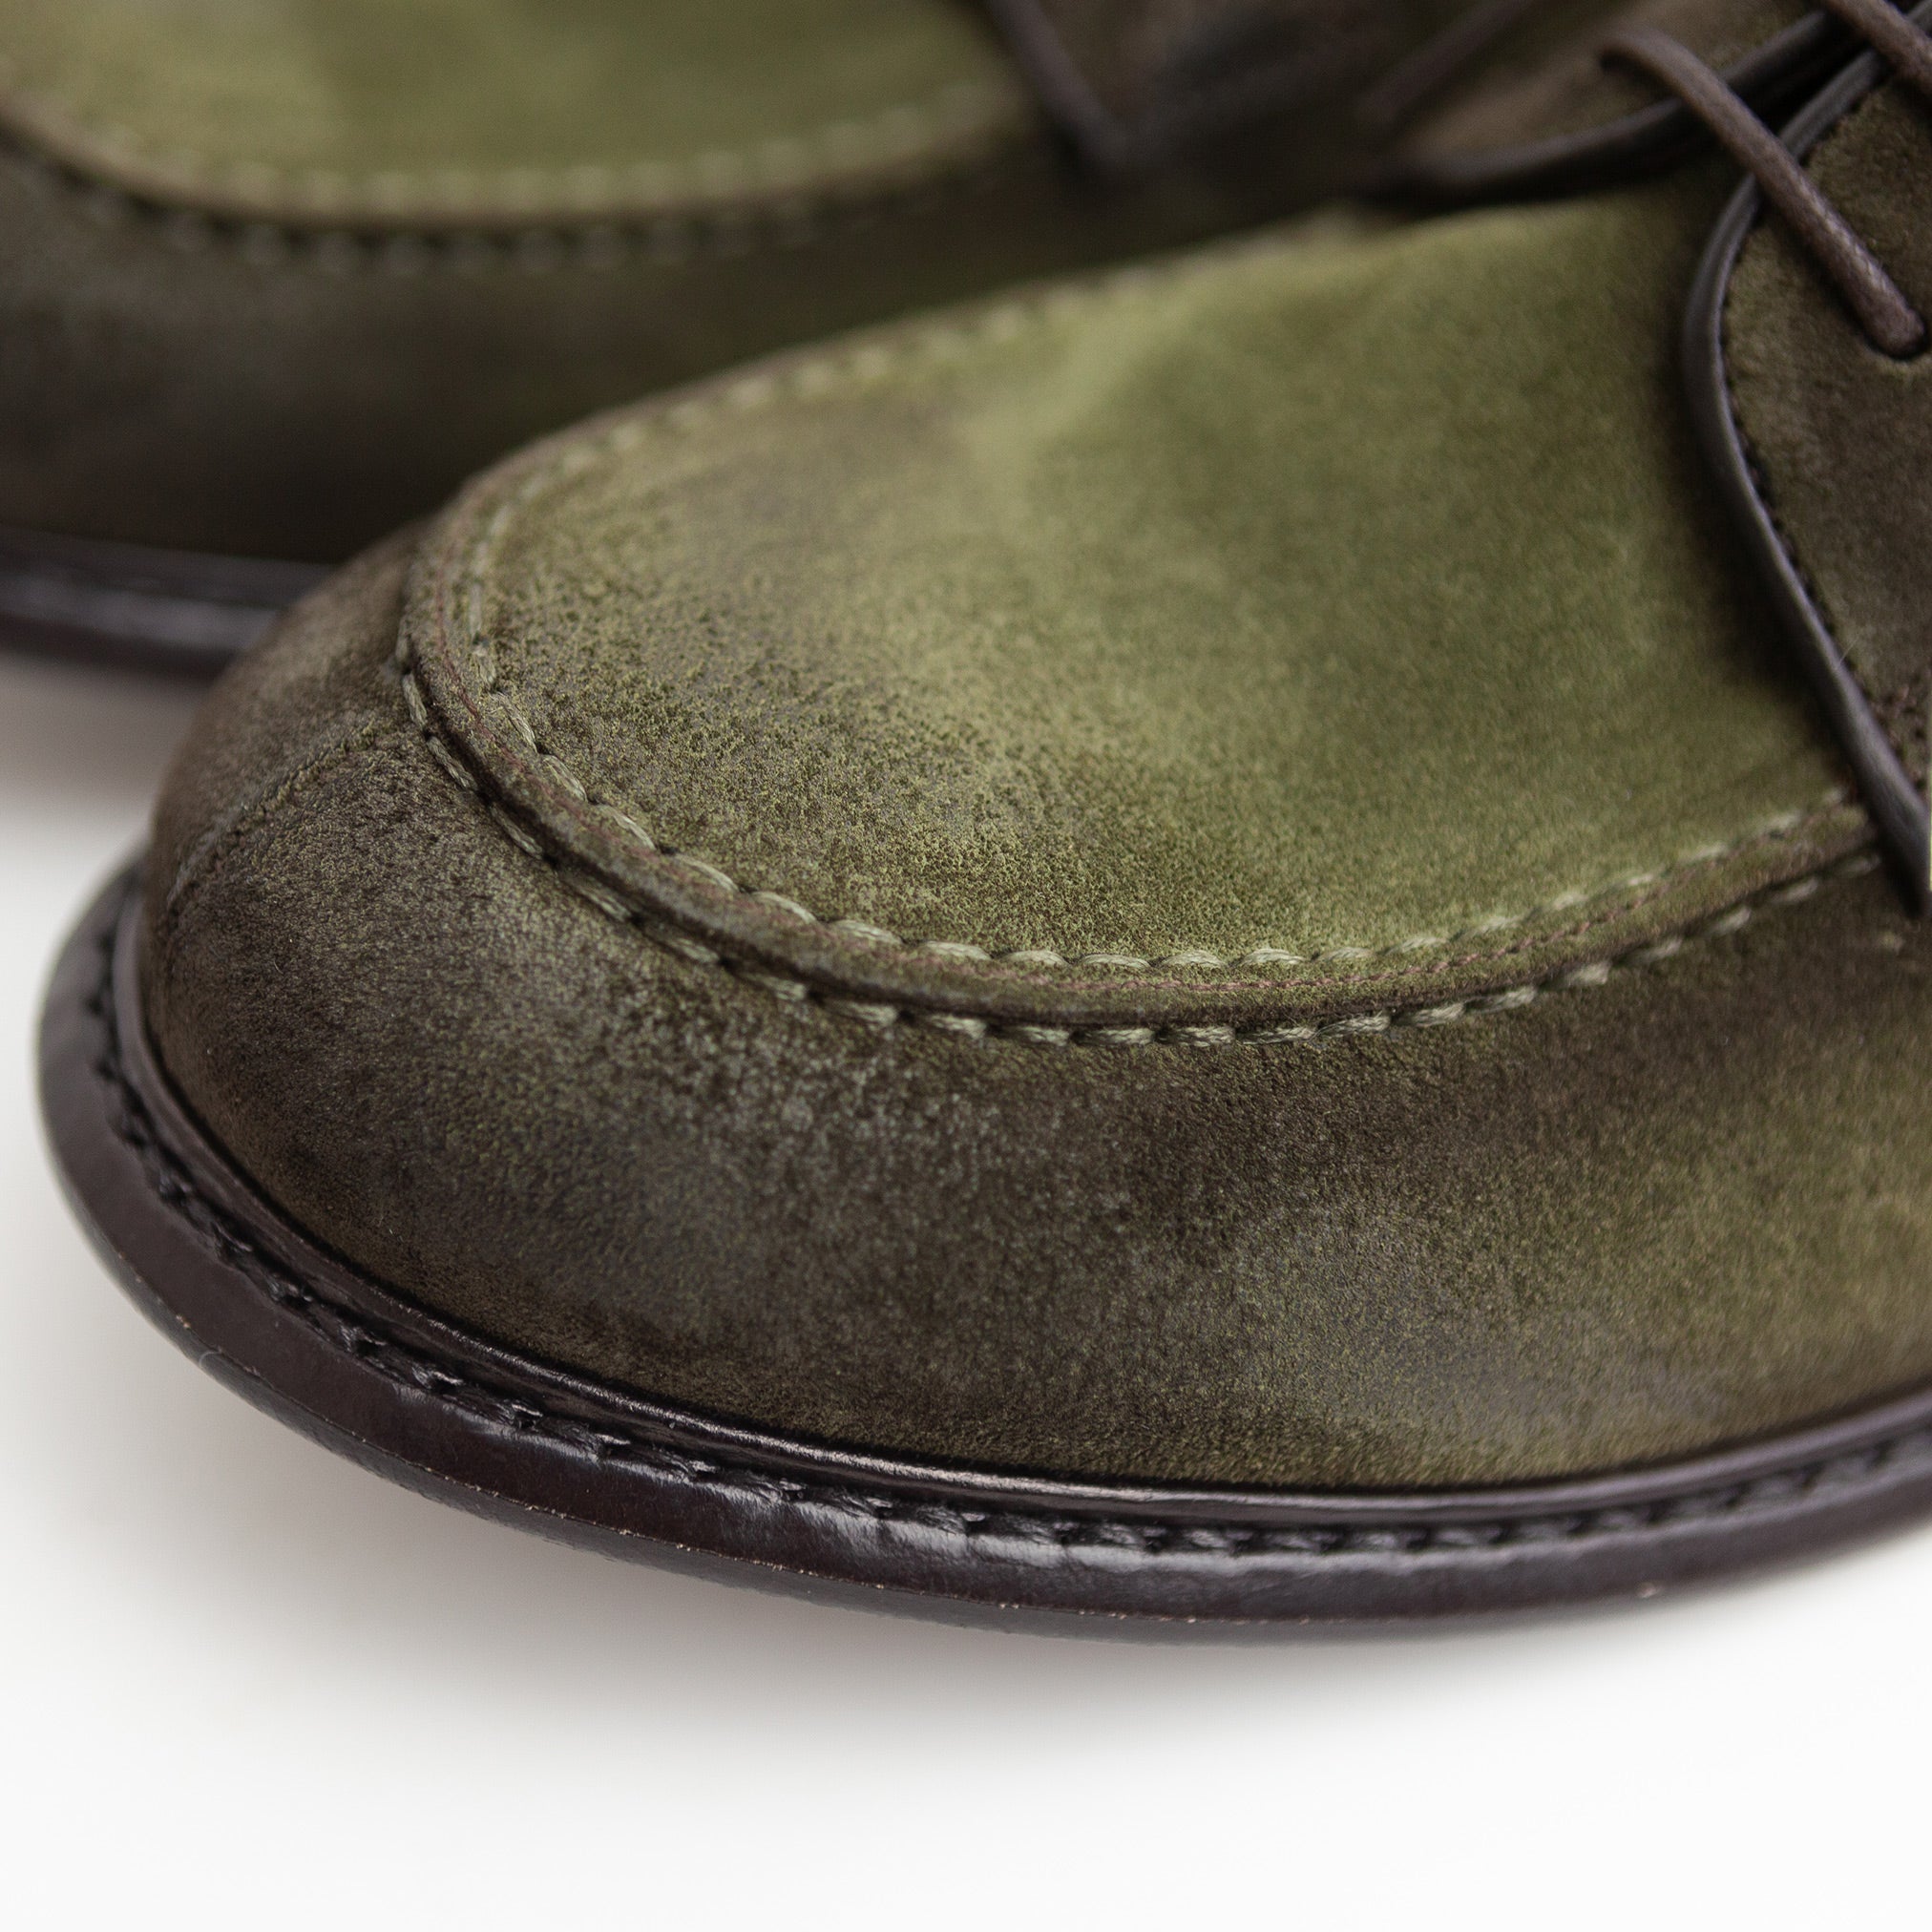 The Derby Shoe in Olive Suede